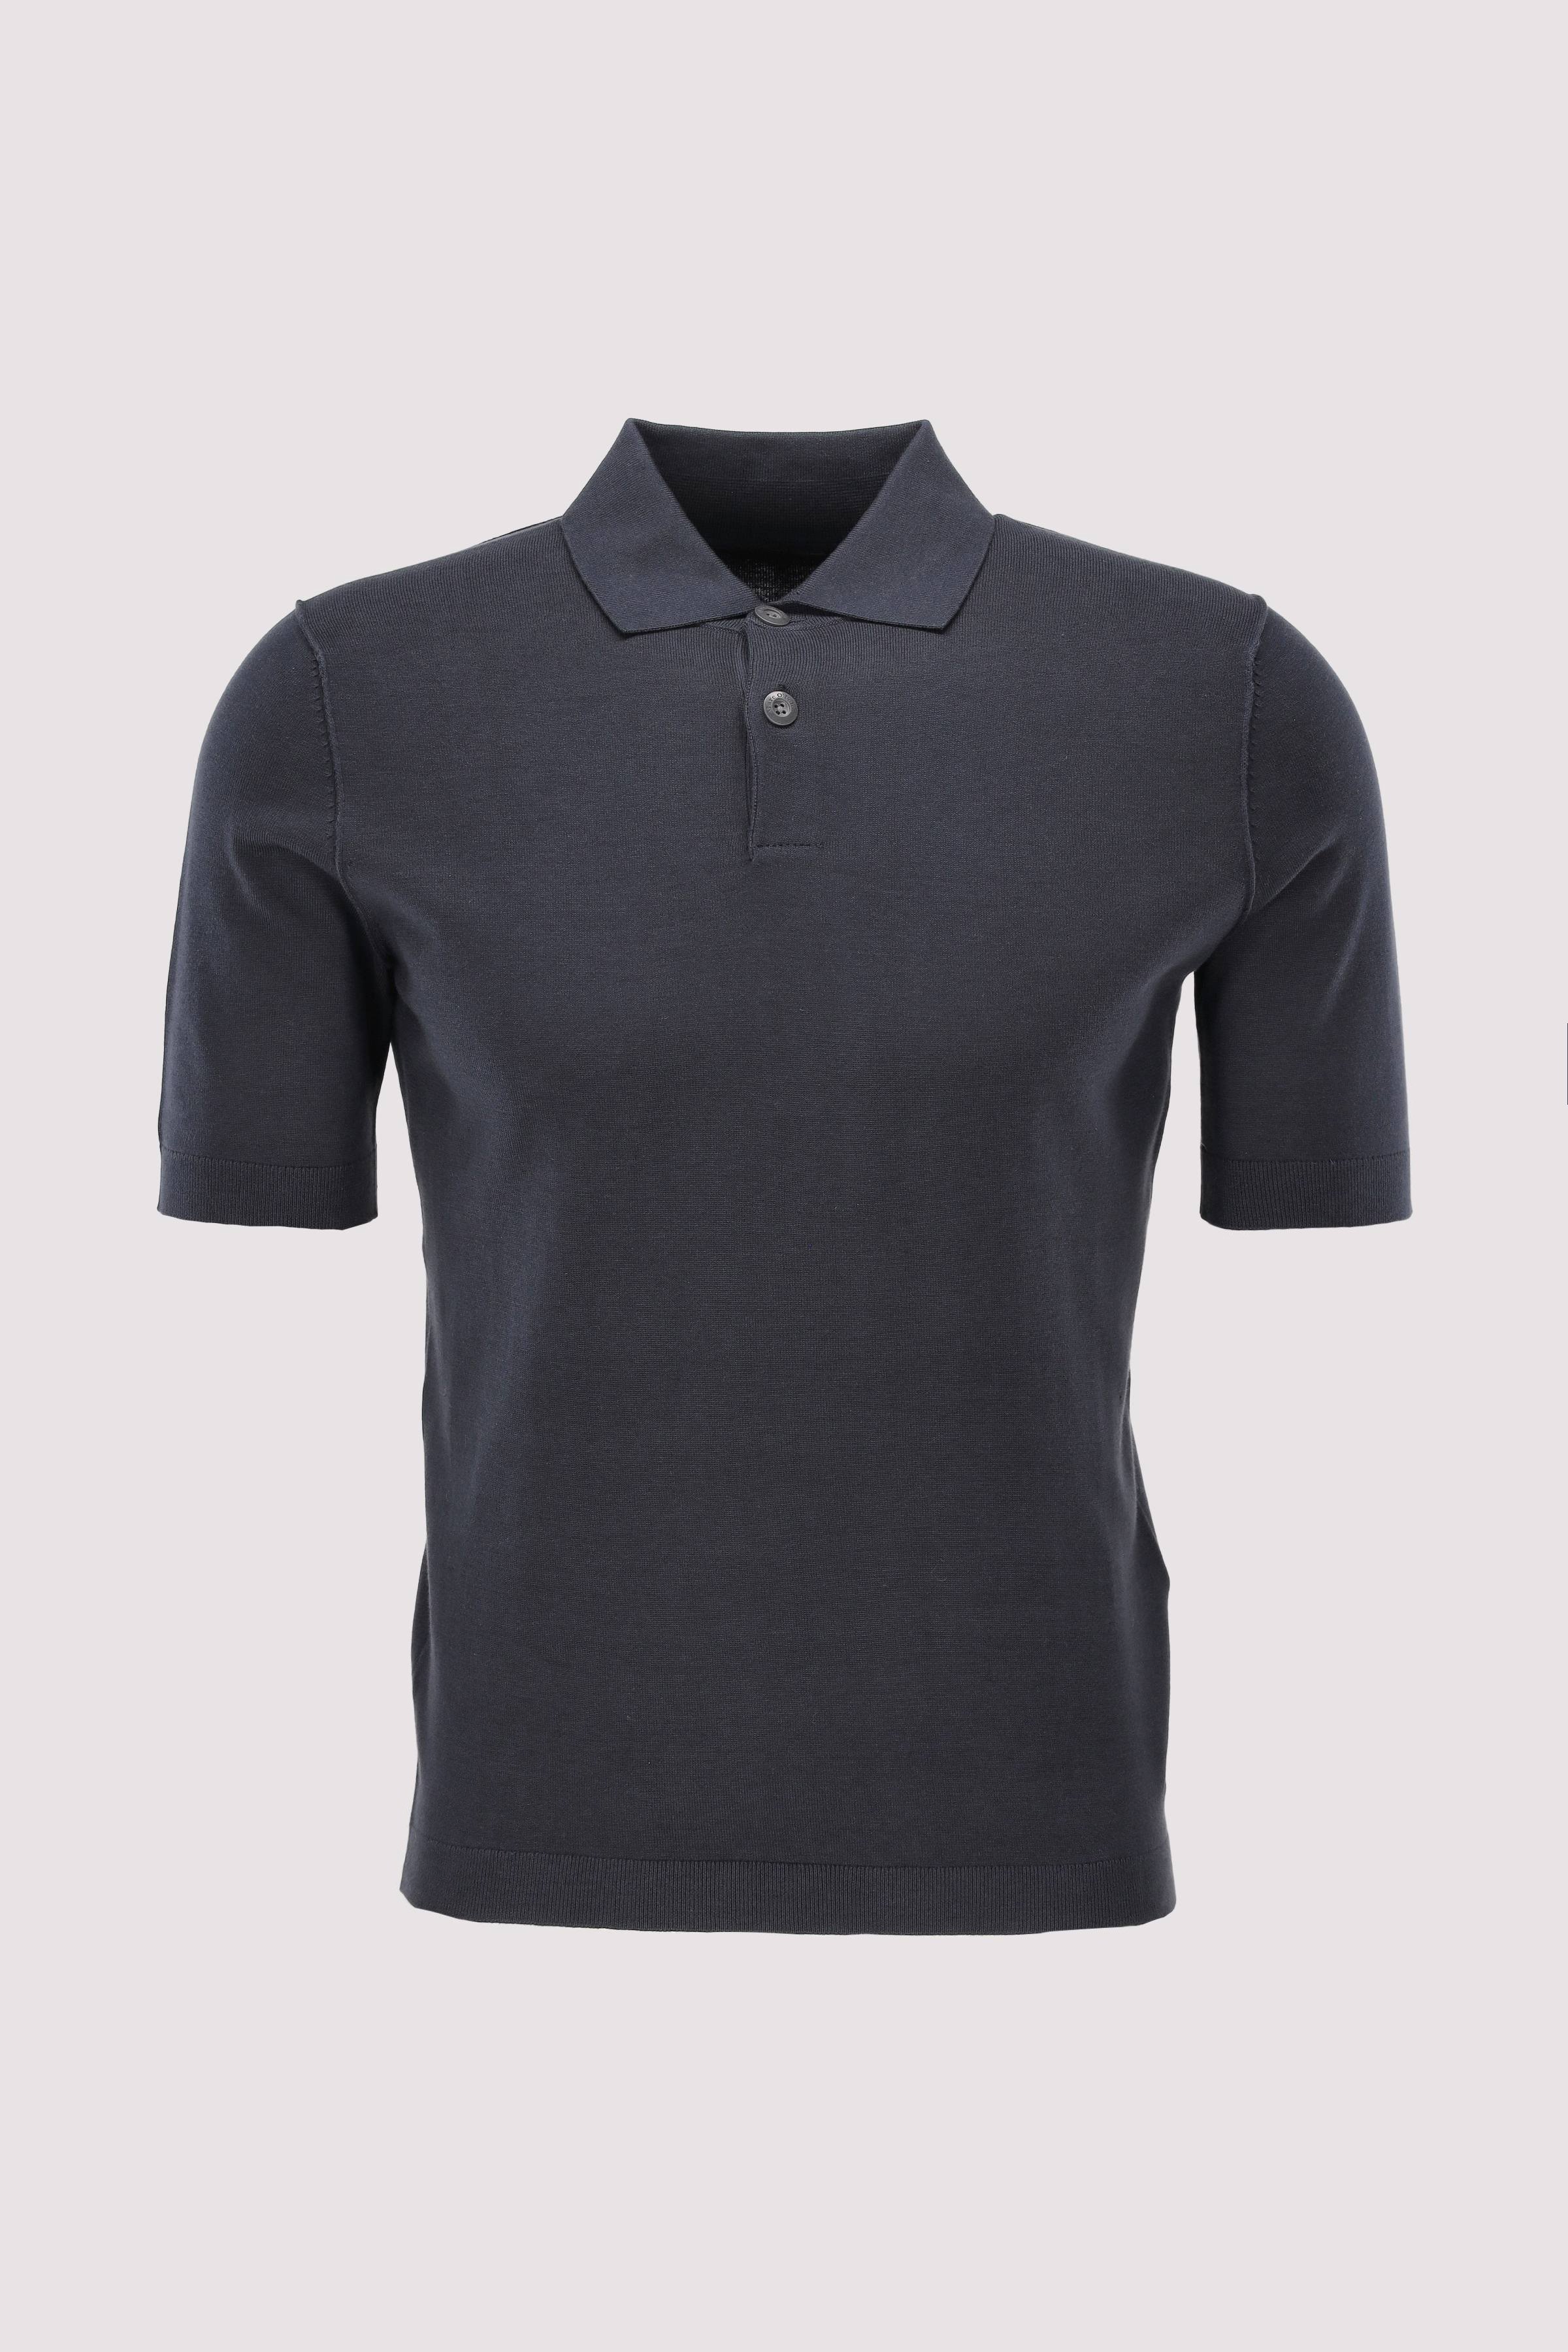 Polo shirt, knitted